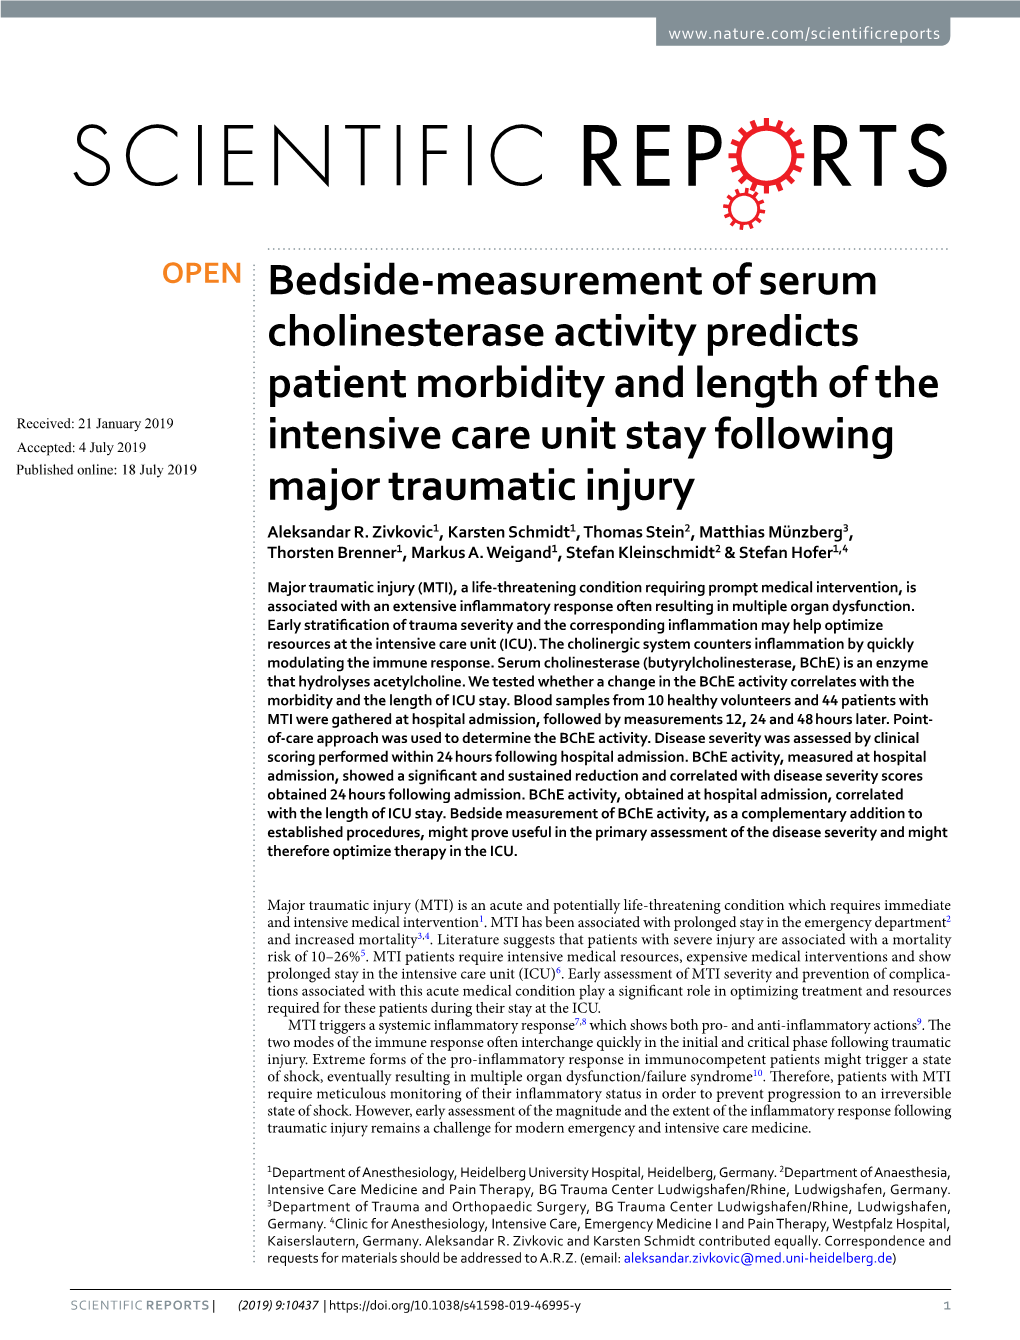 Bedside-Measurement of Serum Cholinesterase Activity Predicts